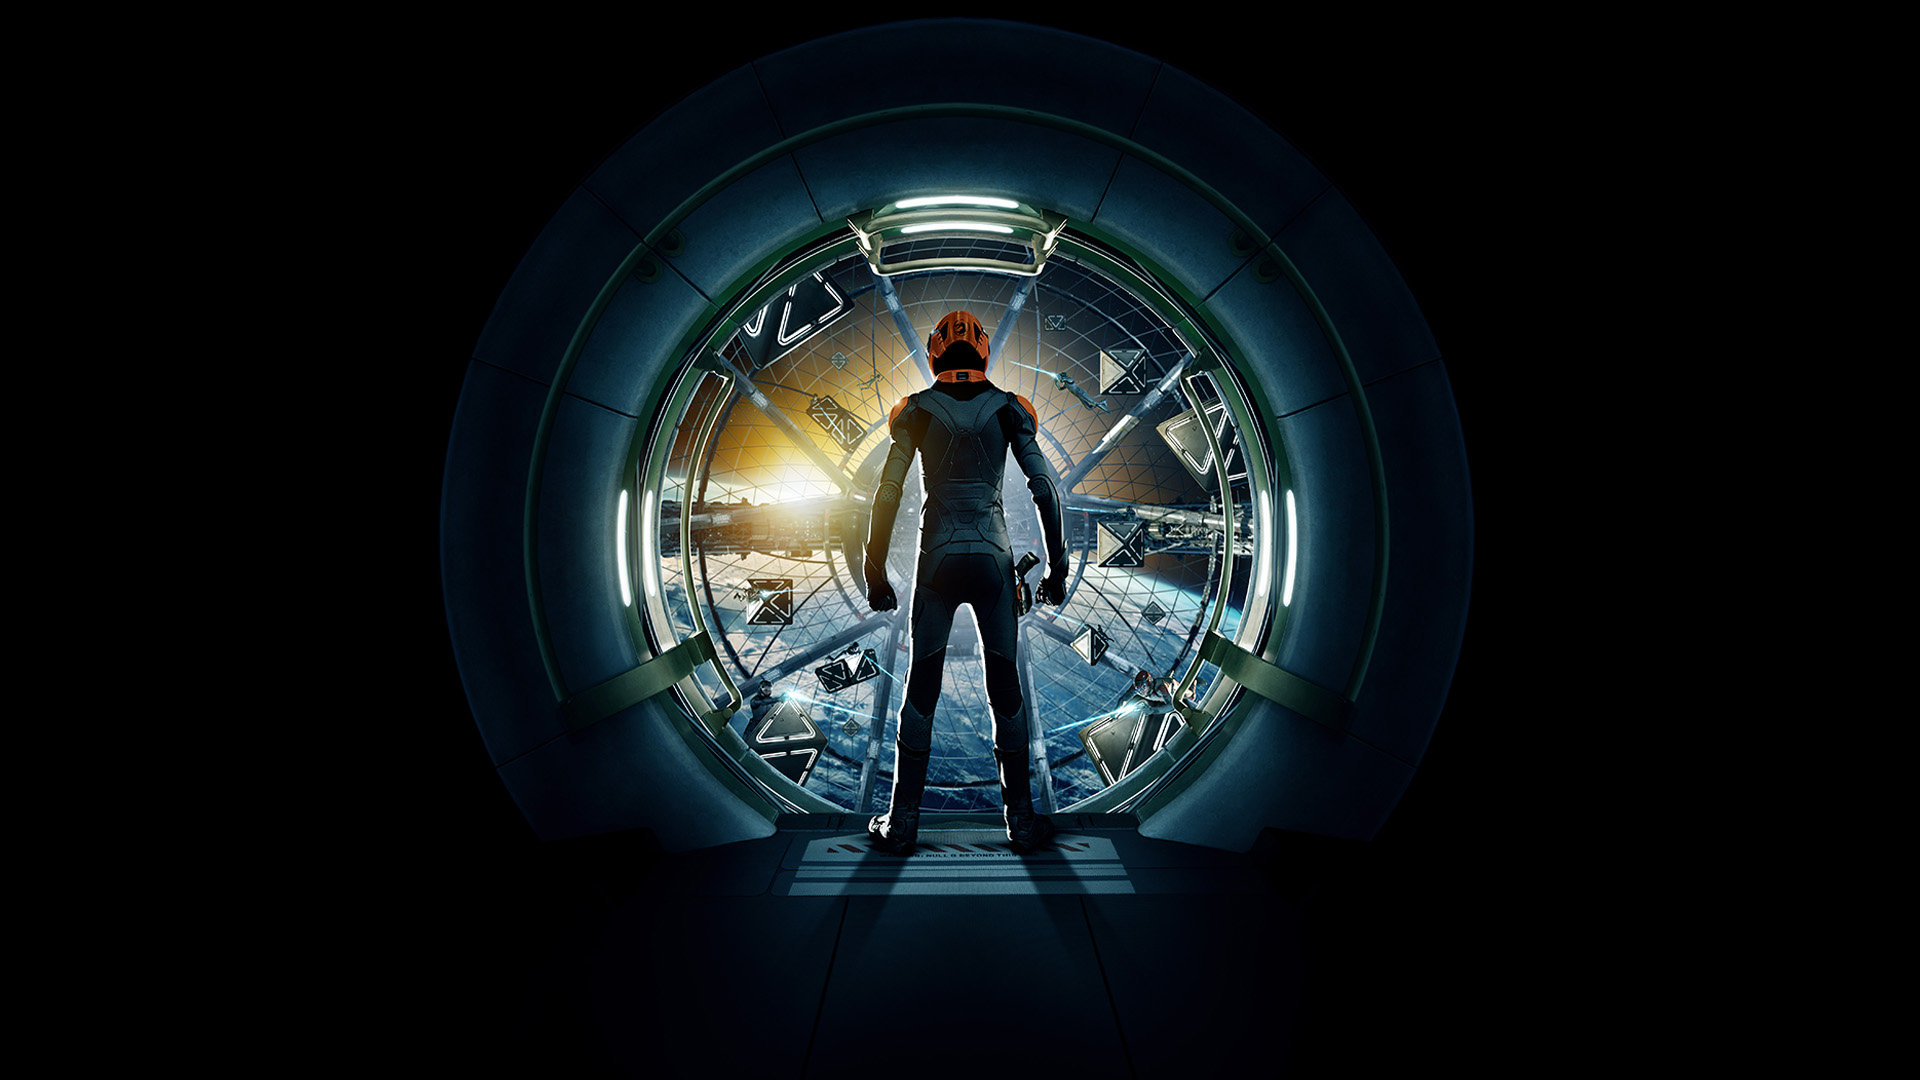 Awesome Ender's Game free wallpaper ID:410291 for full hd computer